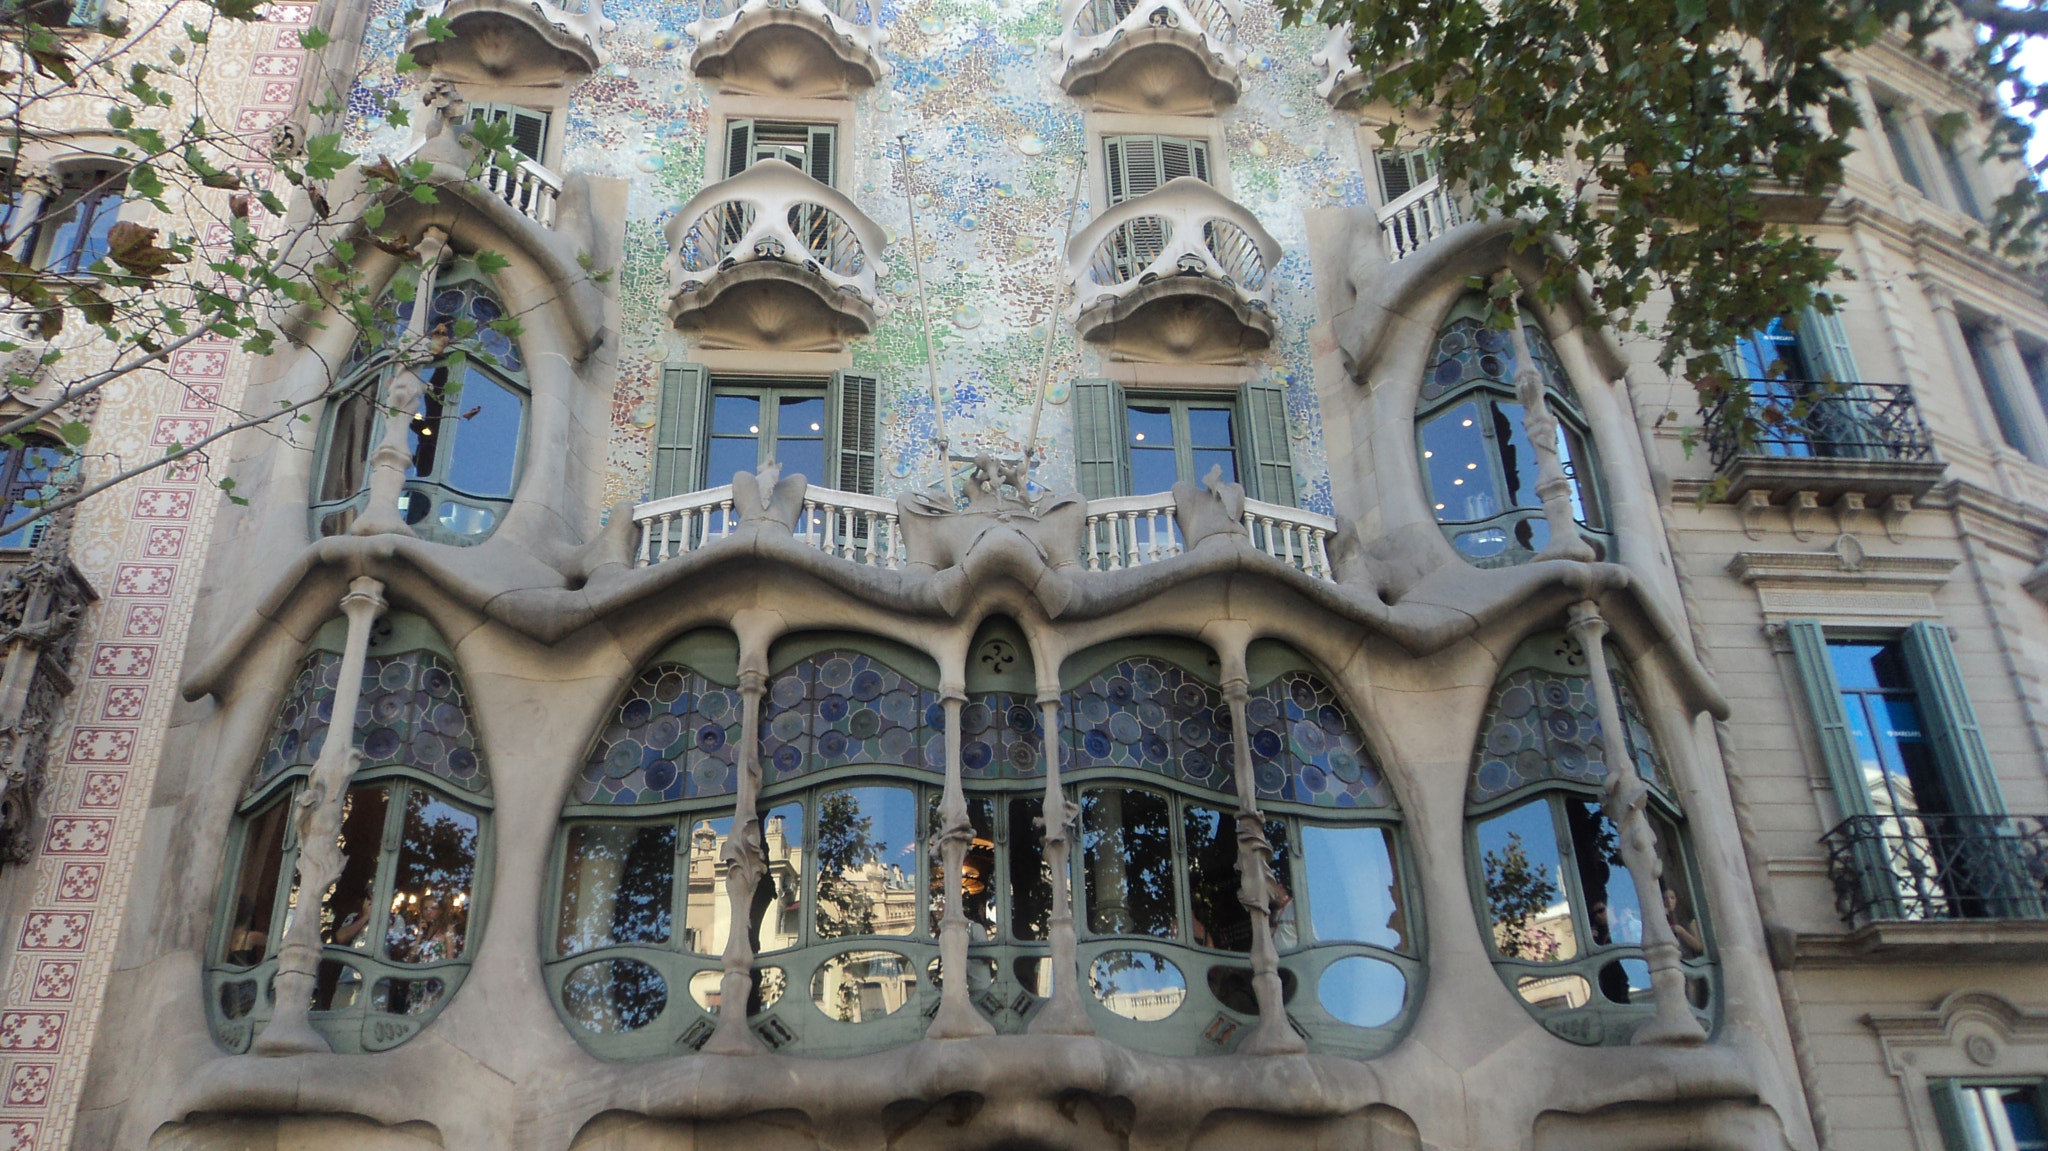 Sony Cyber-shot DSC-W310 sample photo. In love with casa batlló's facade photography